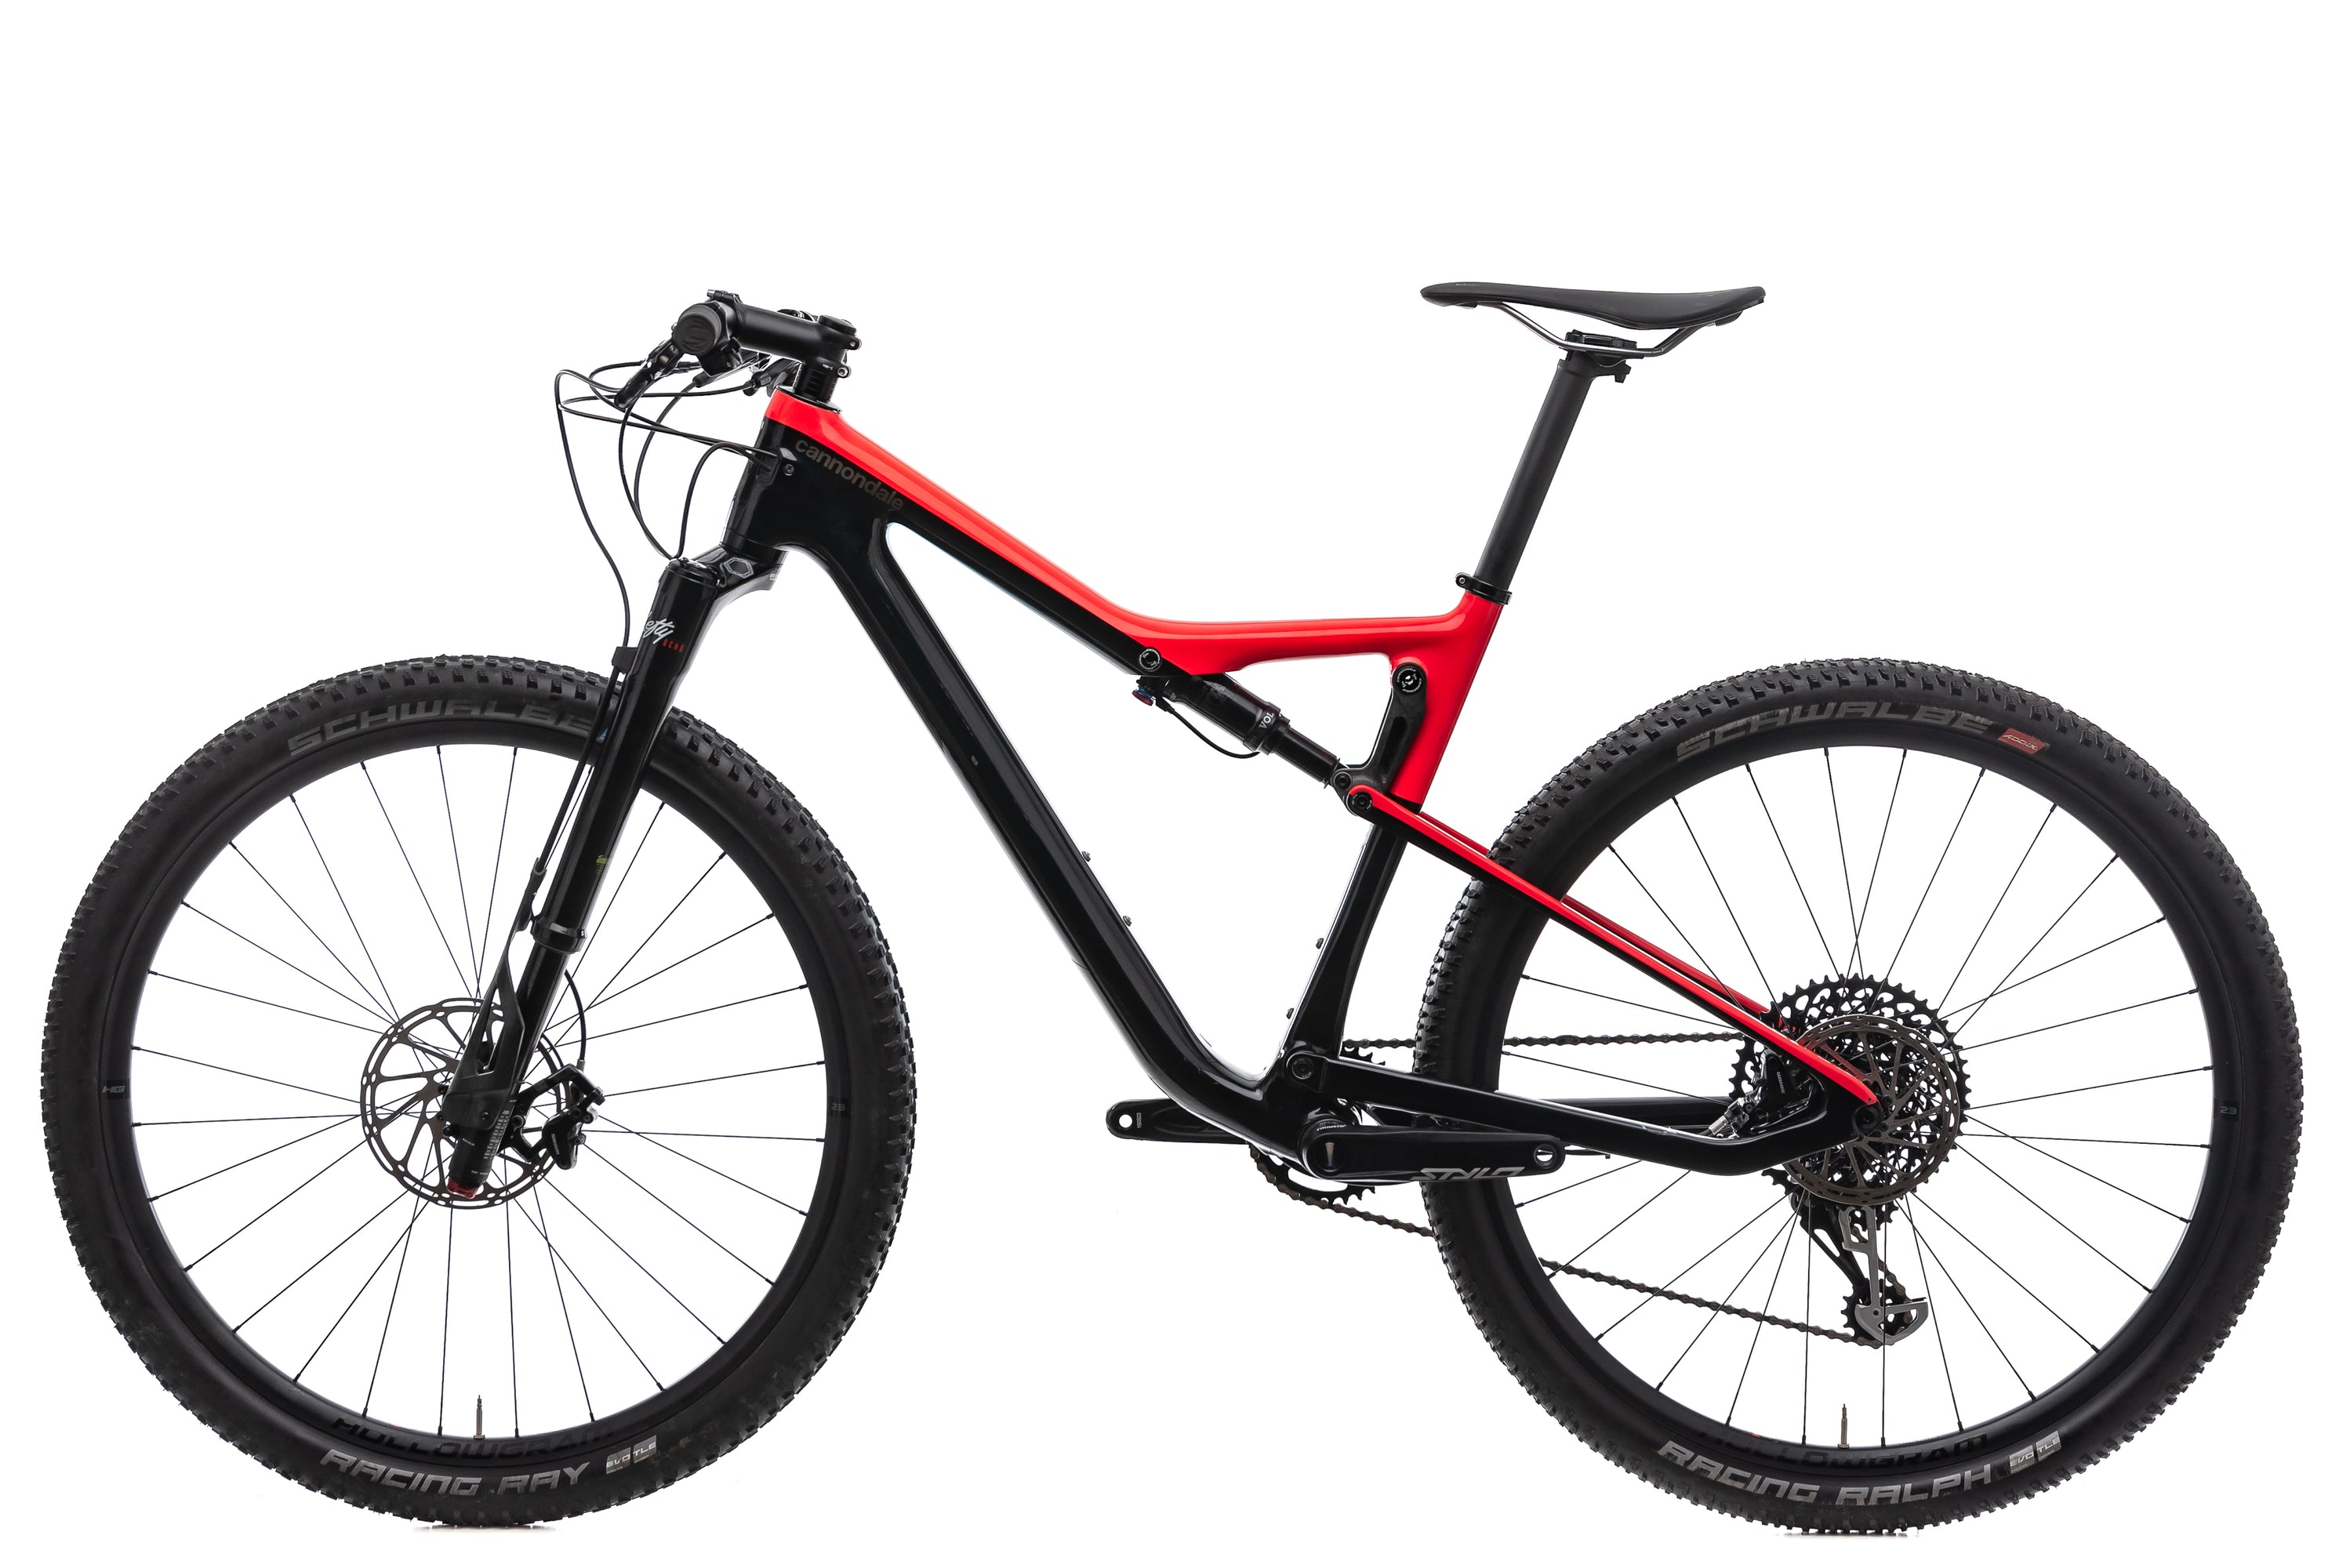 Cannondale Scalpel Si Carbon 3 29 Mountain Bike - 2020, Large non-drive side